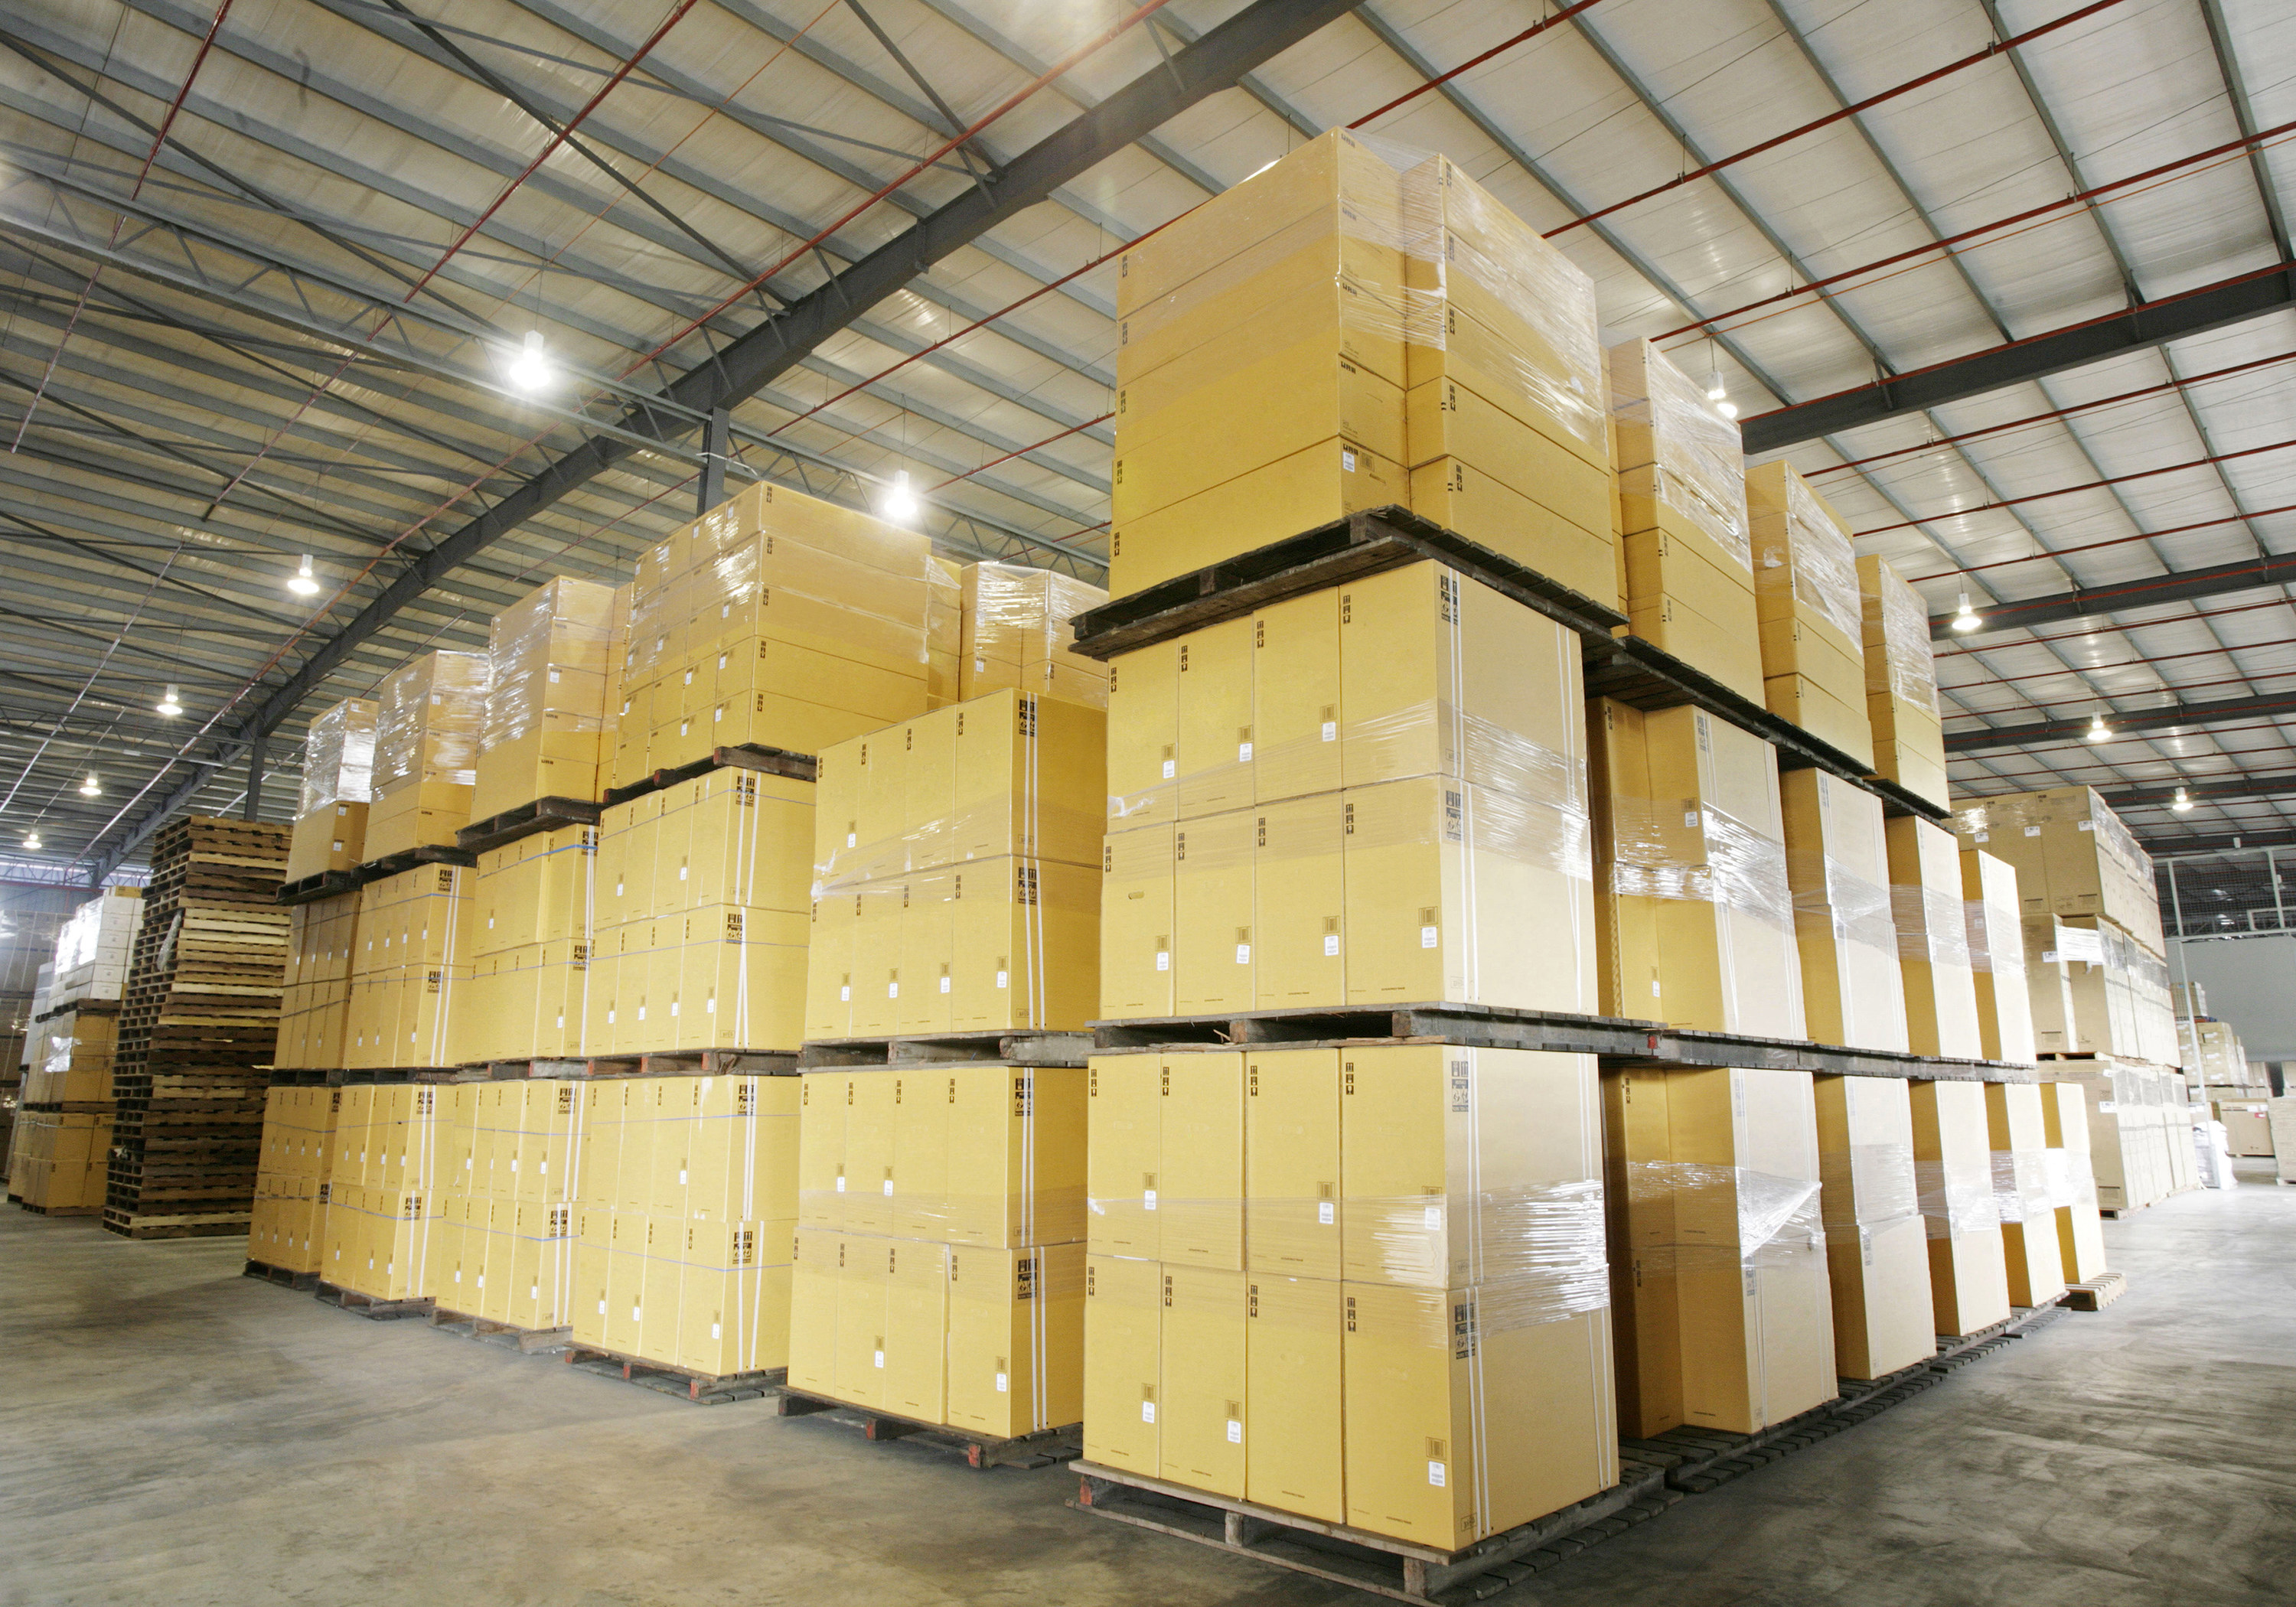 Packages in a warehouse